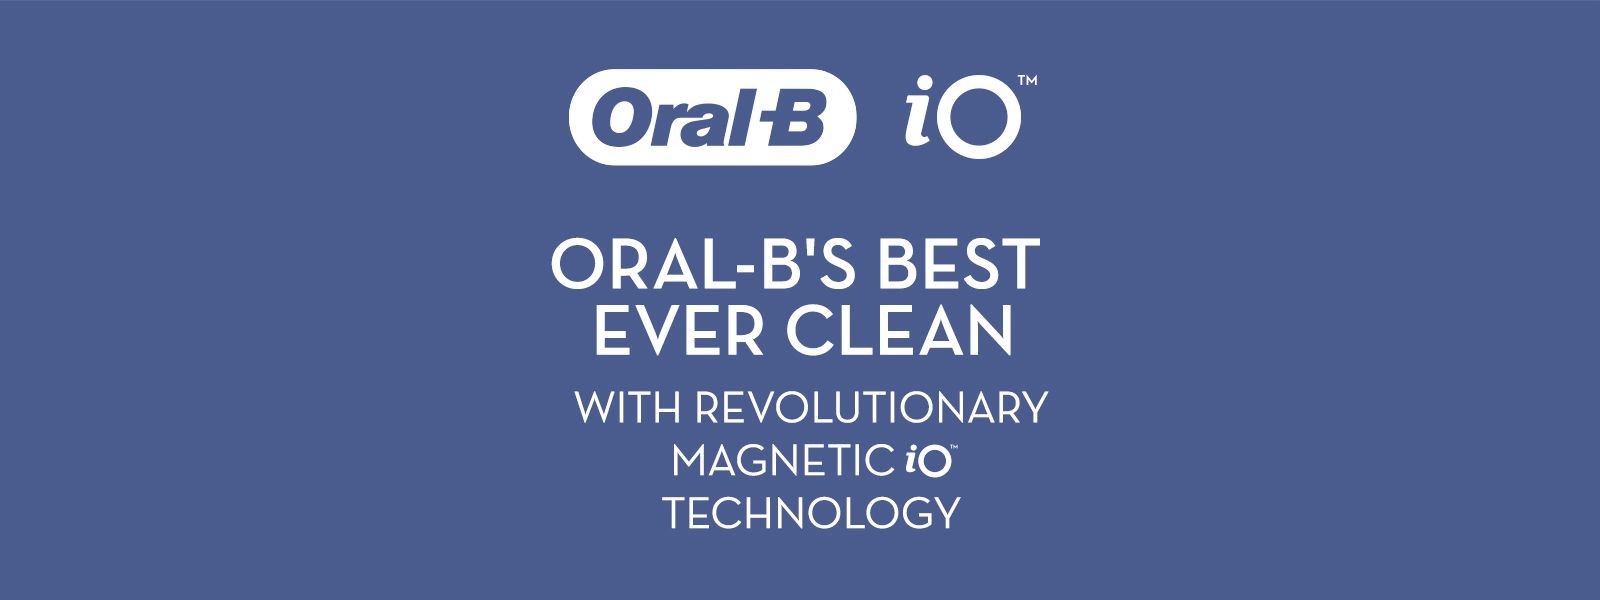 Oral-B iO ORAL-B'S BEST EVER CLEAN WITH REVOLUTIONARY MAGNETIC iO TECHNOLOGY.